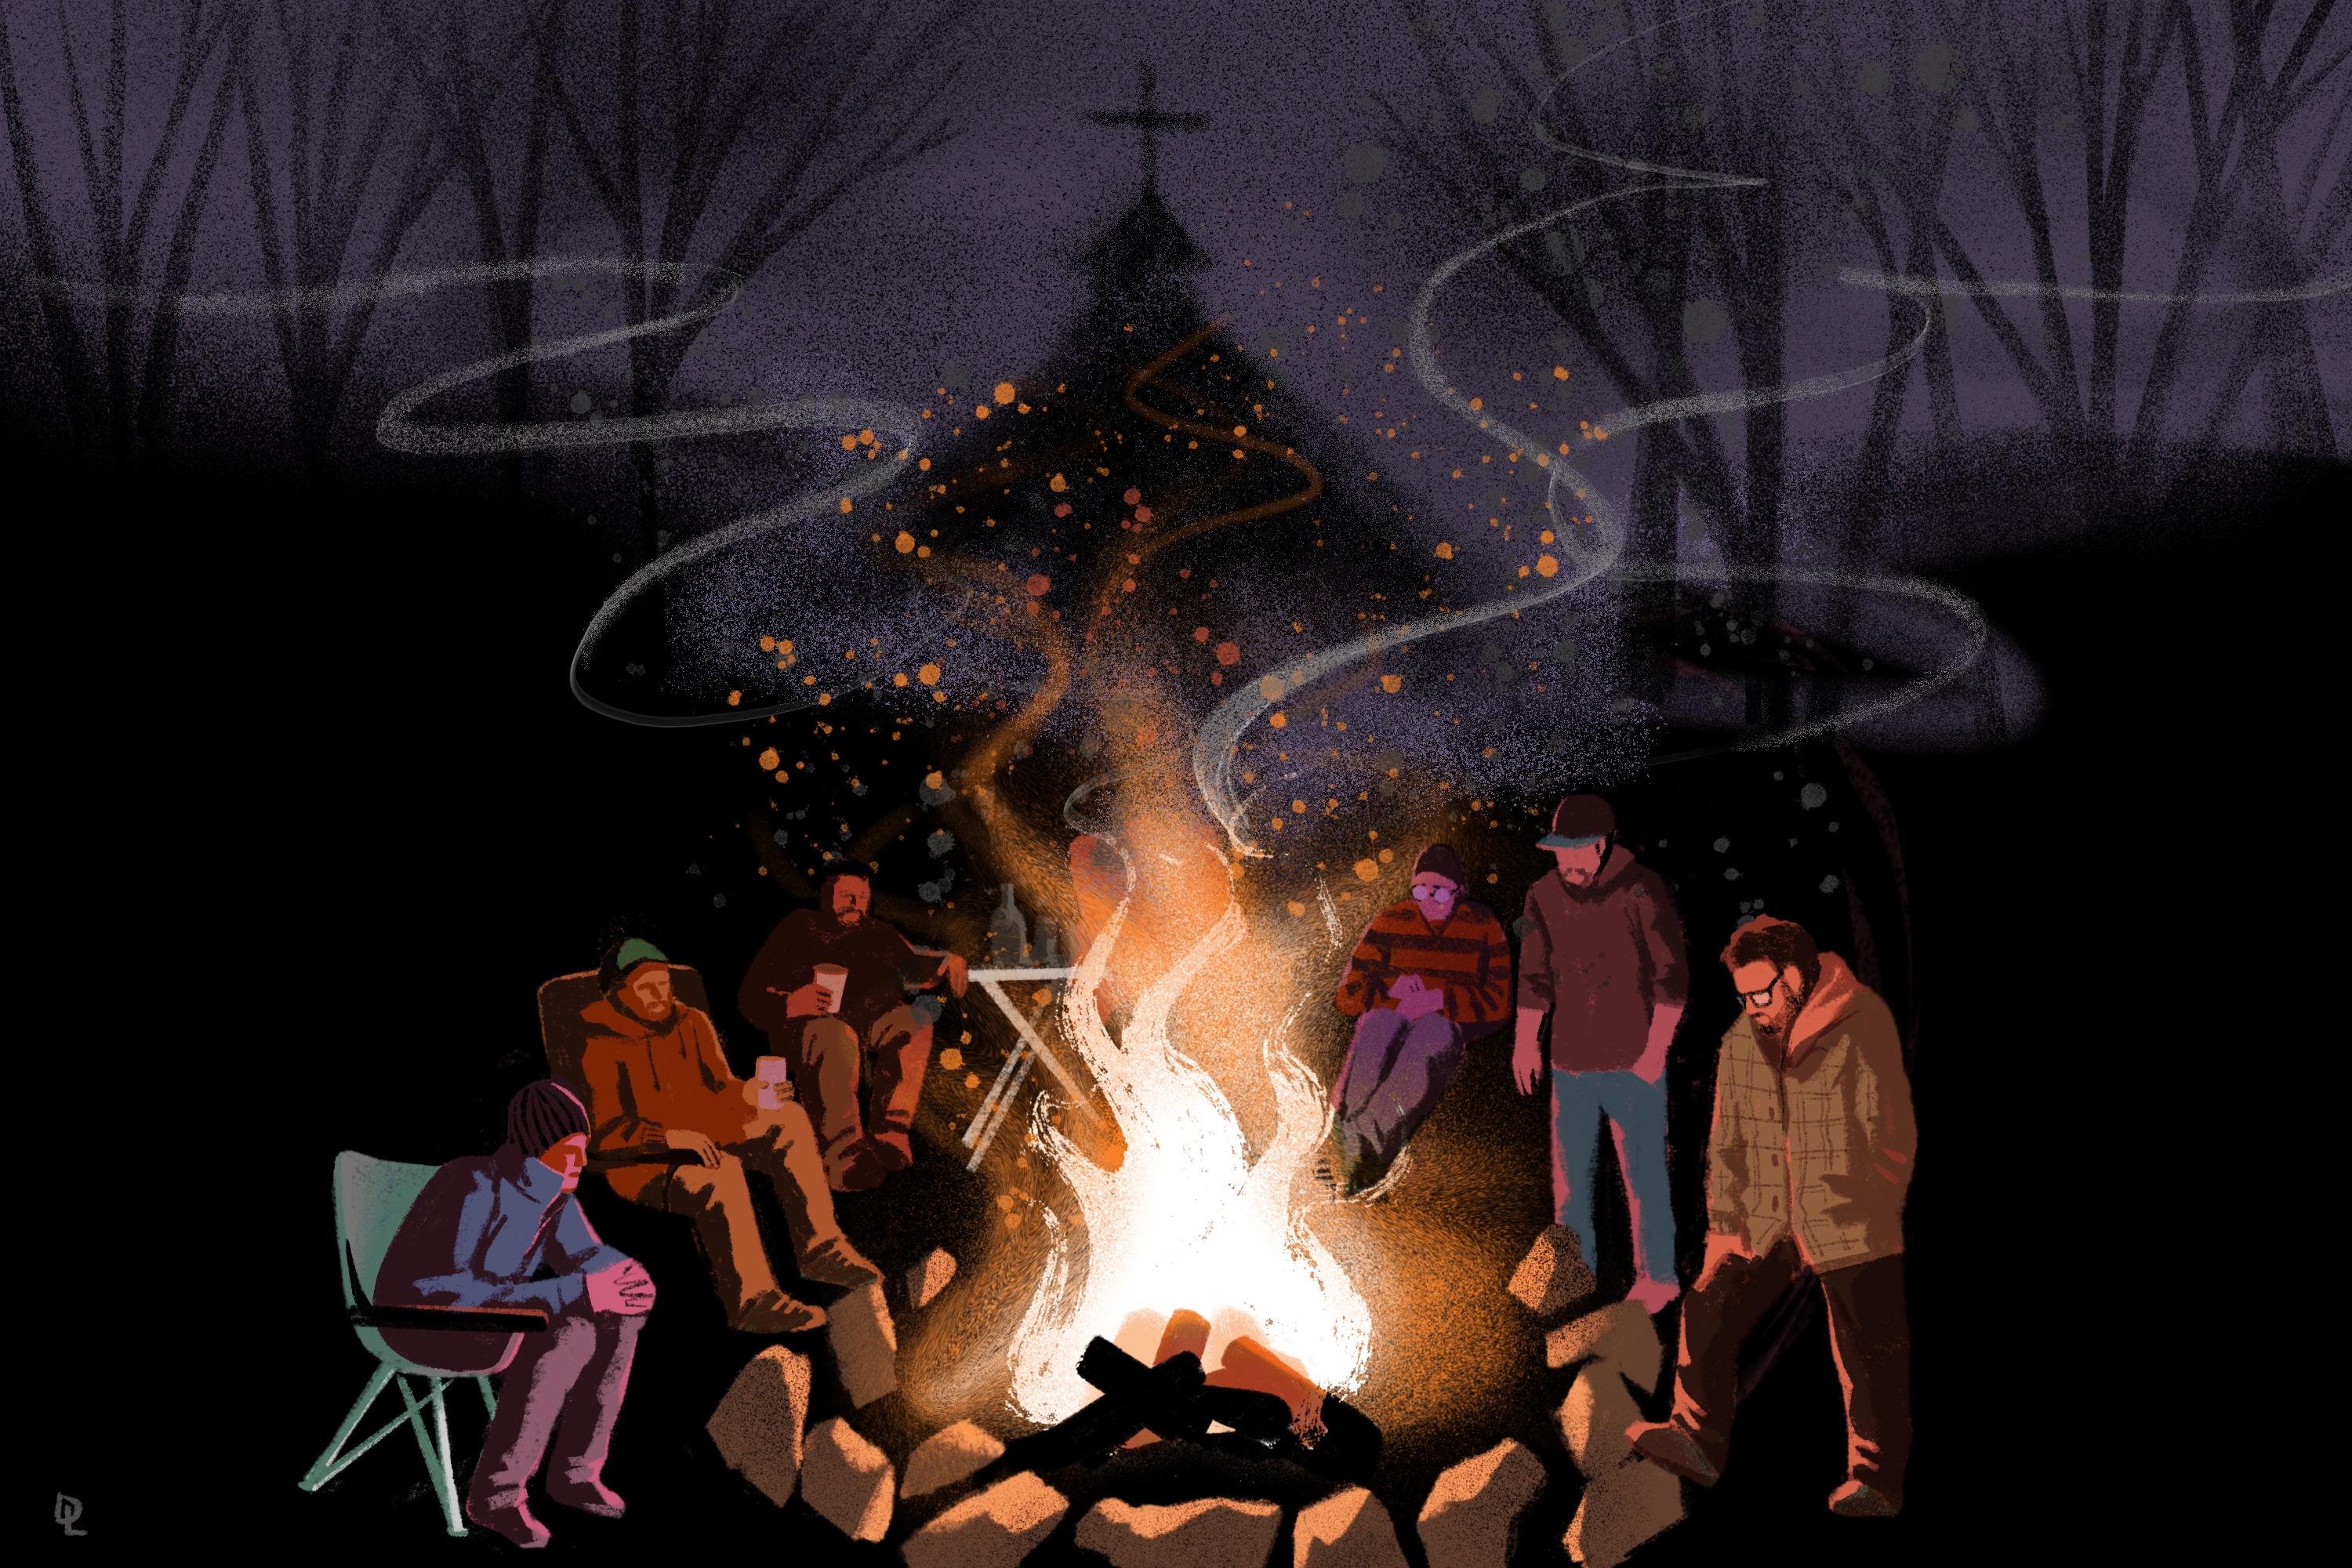 Illustration of nighttime in the forest. A group of men are sitting and standing around a bonfire, the sparks rising. The shadow of a church spire appears in the night sky.